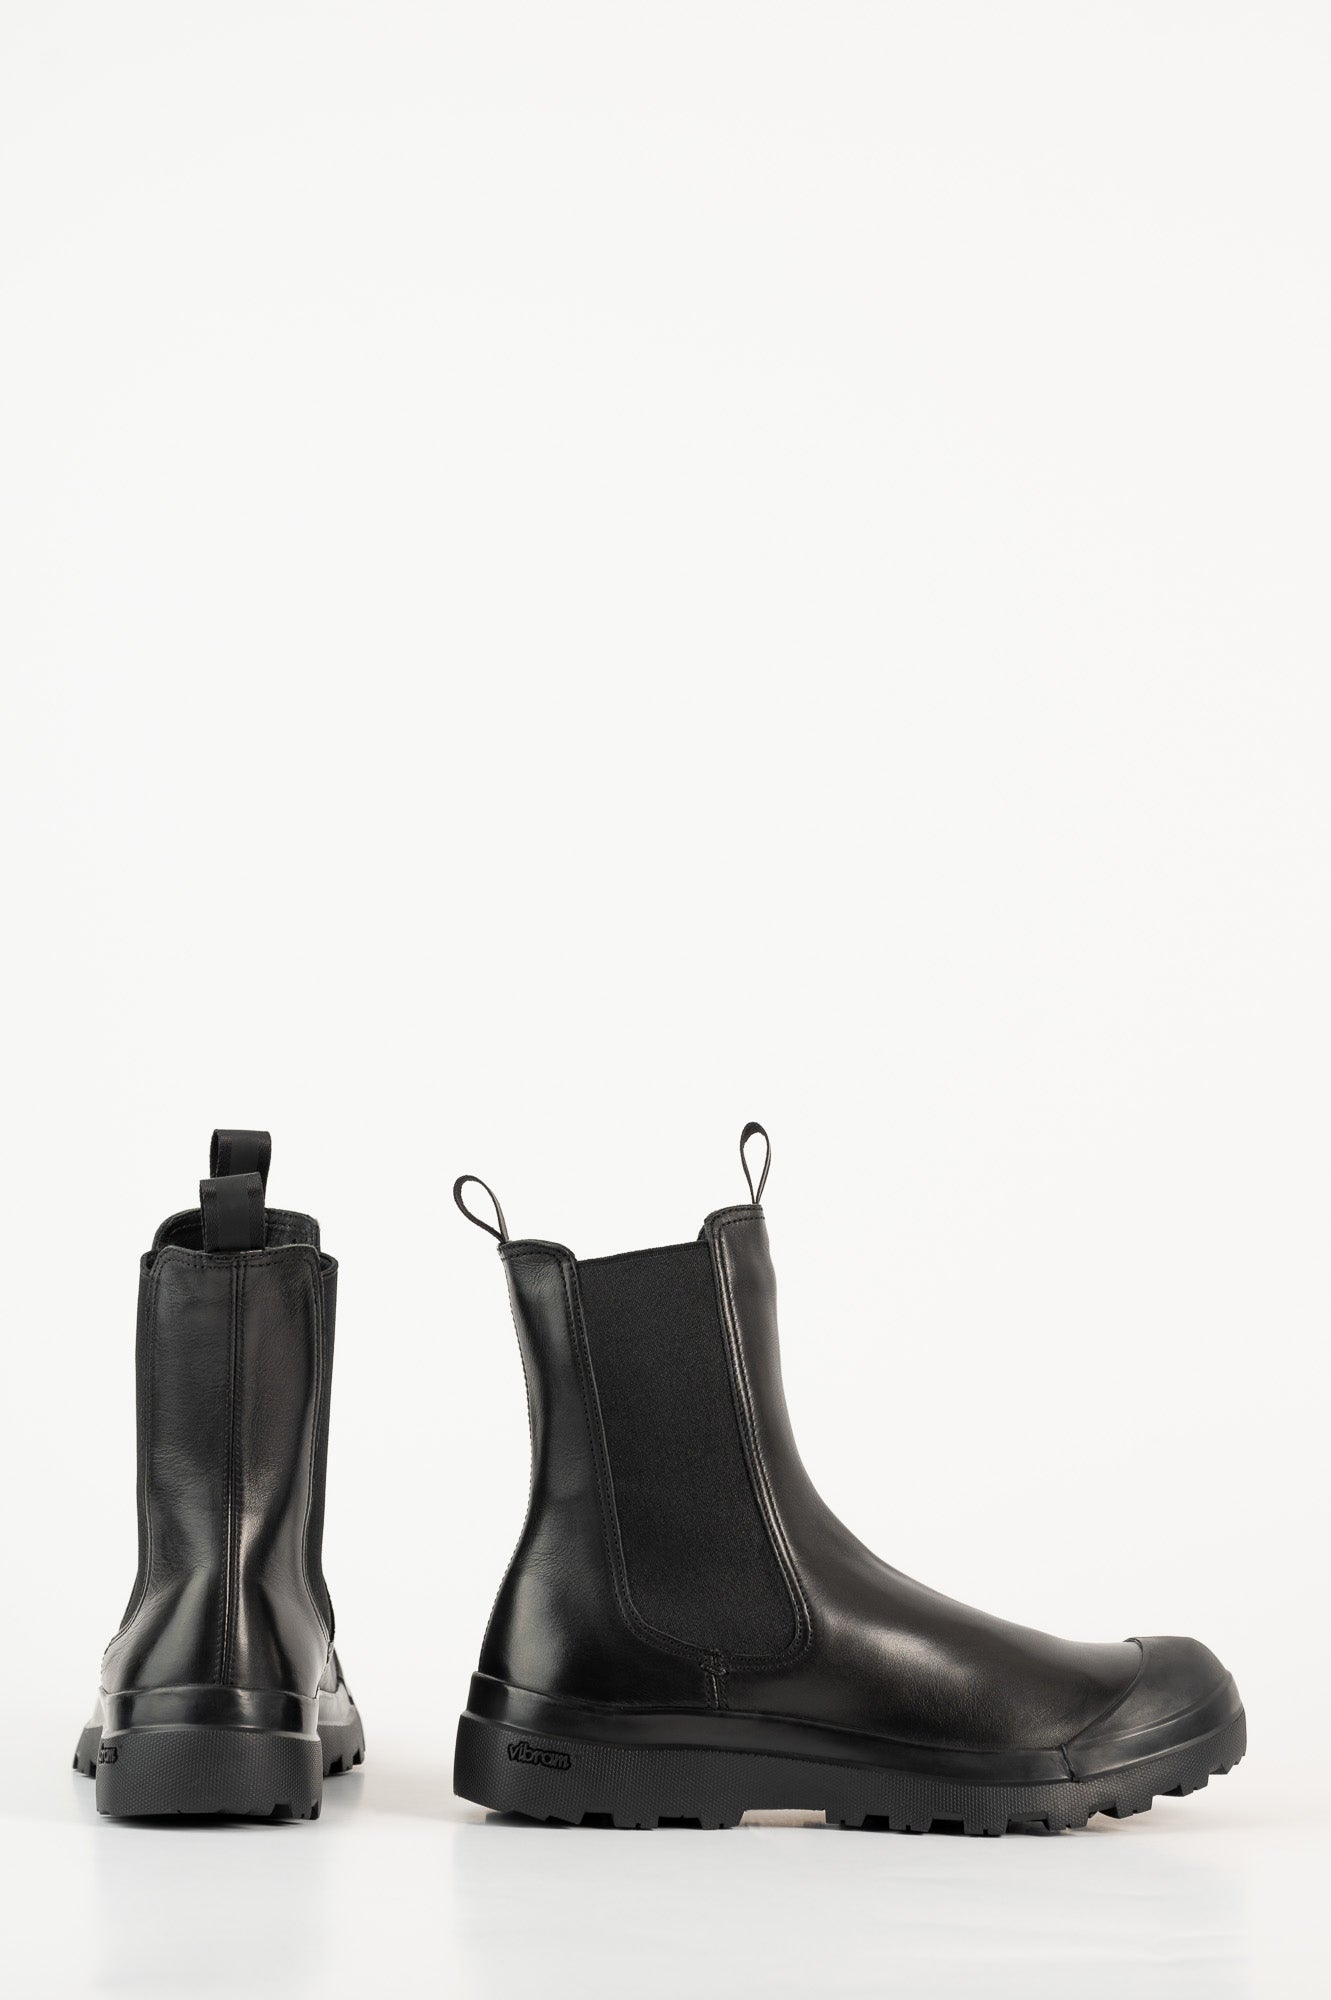 Warm Lined Boot 106 | Black Leather